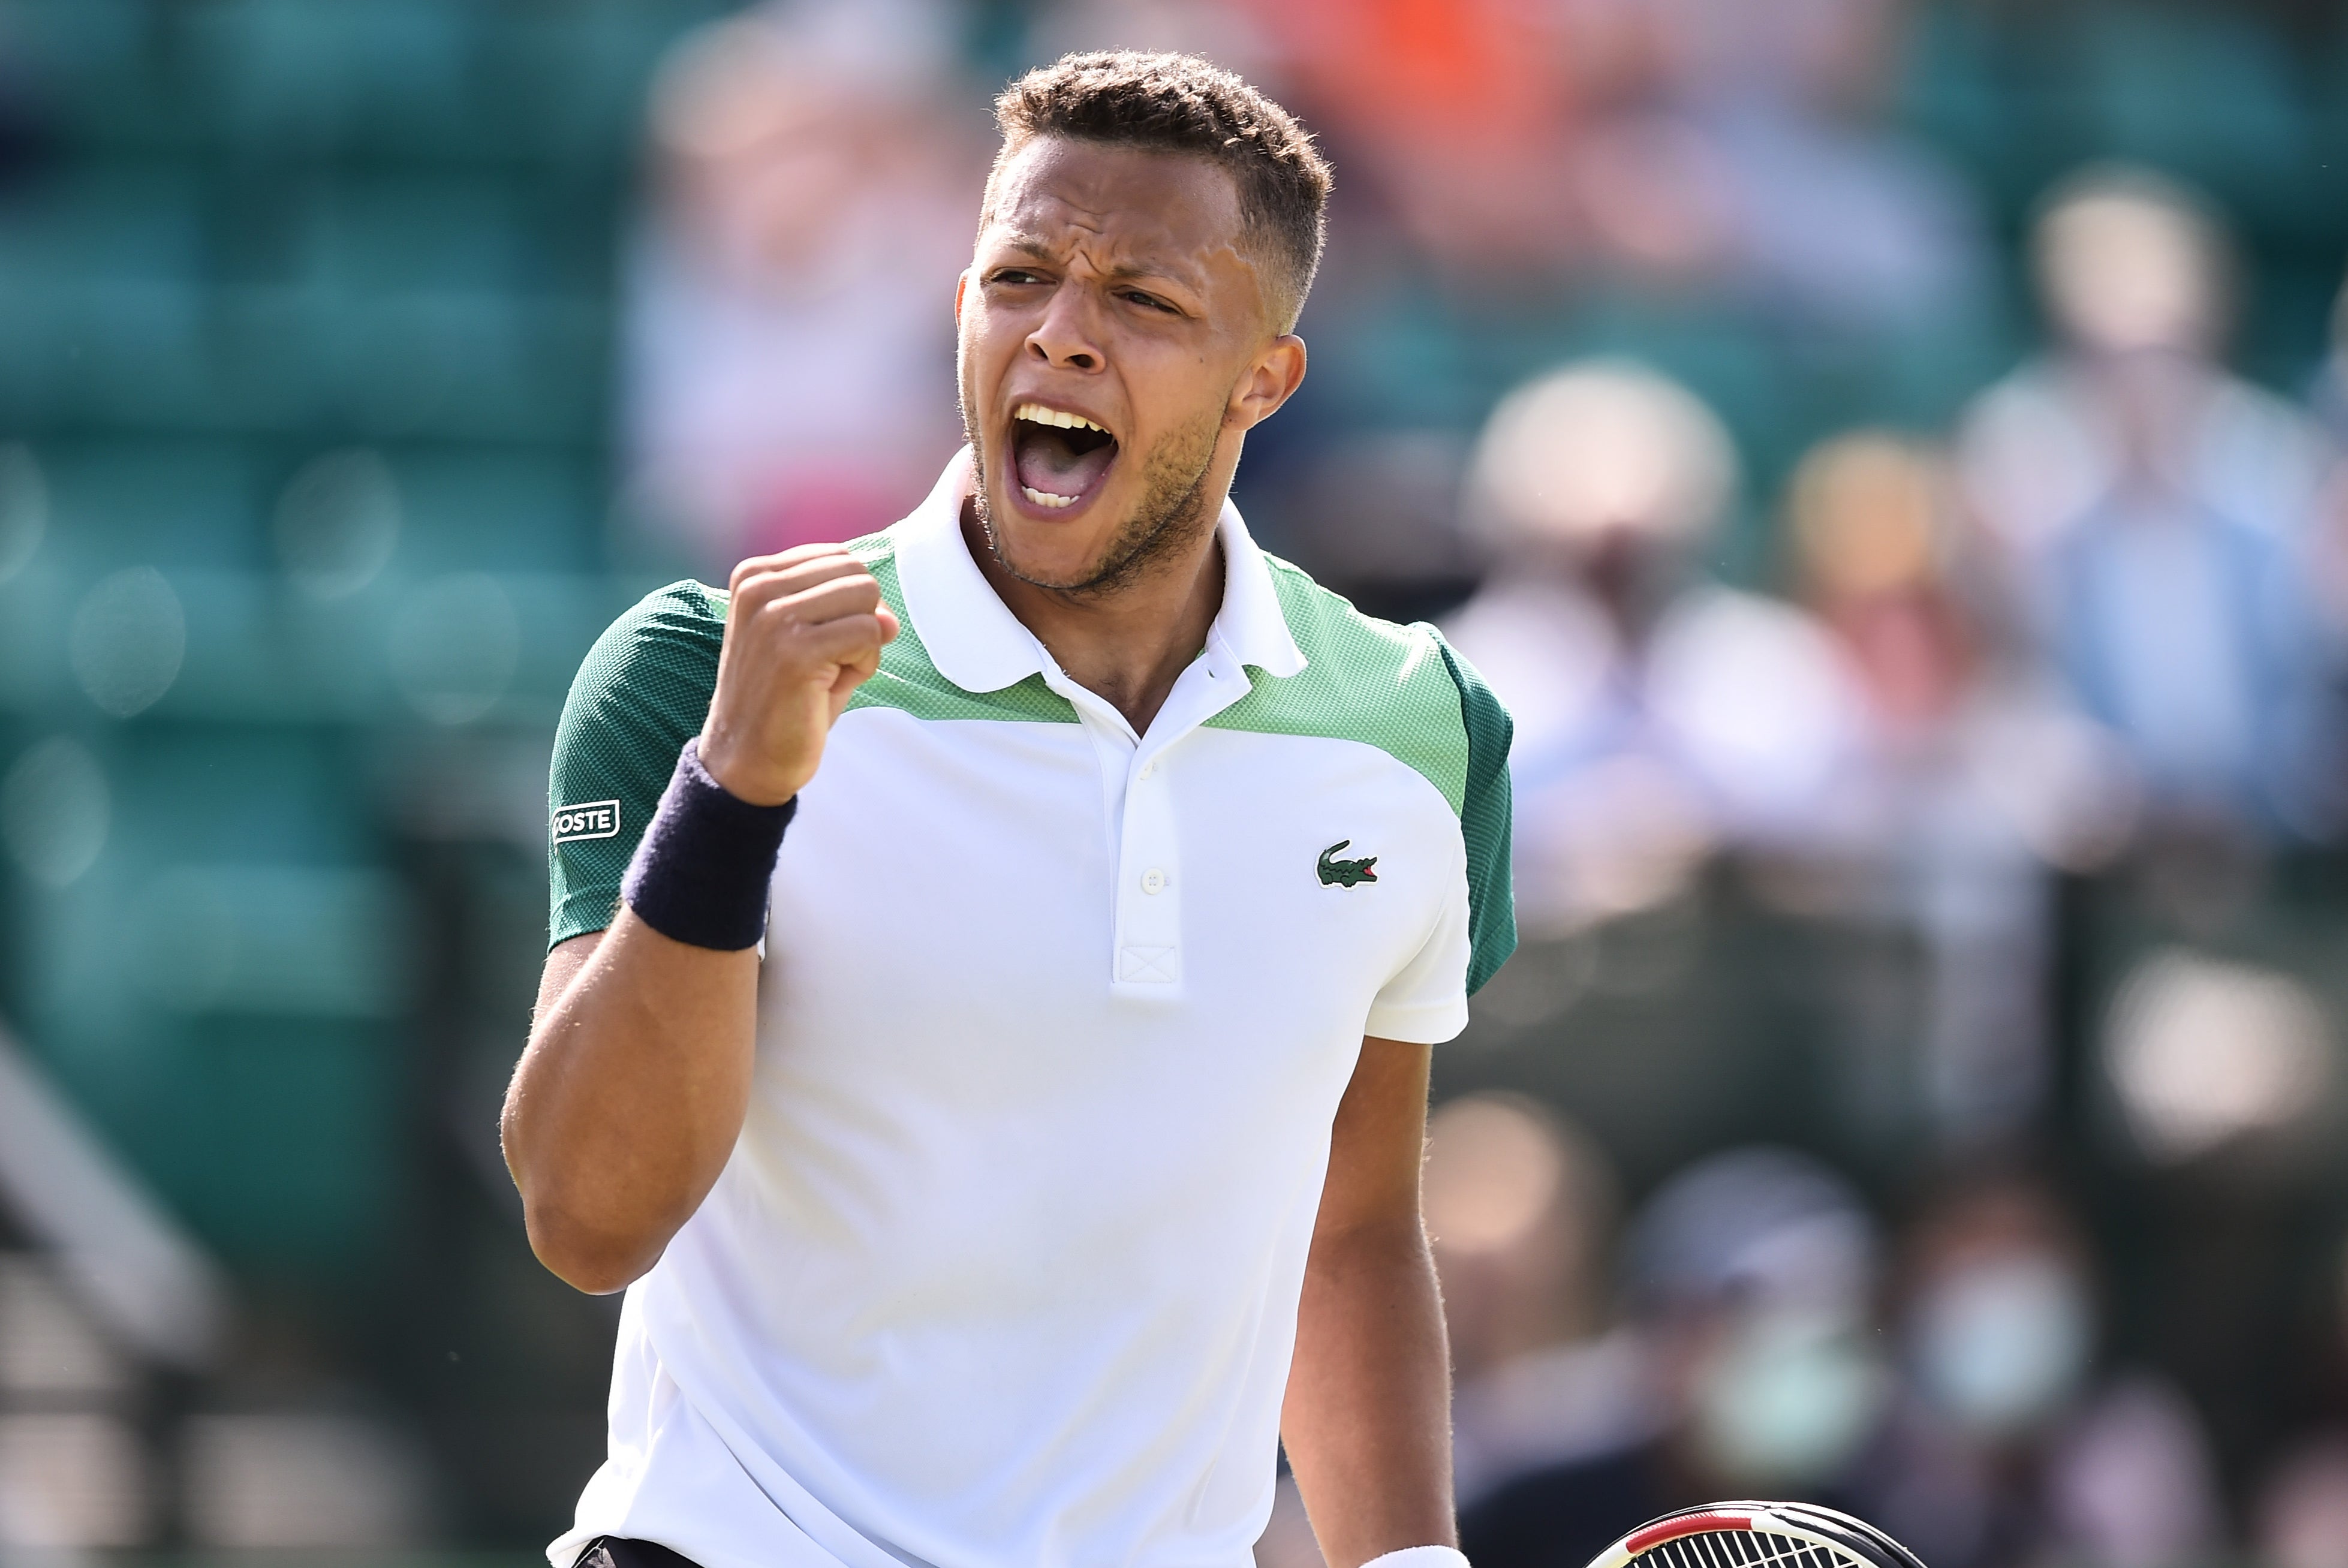 Jay Clarke secured perhaps the biggest win of his career